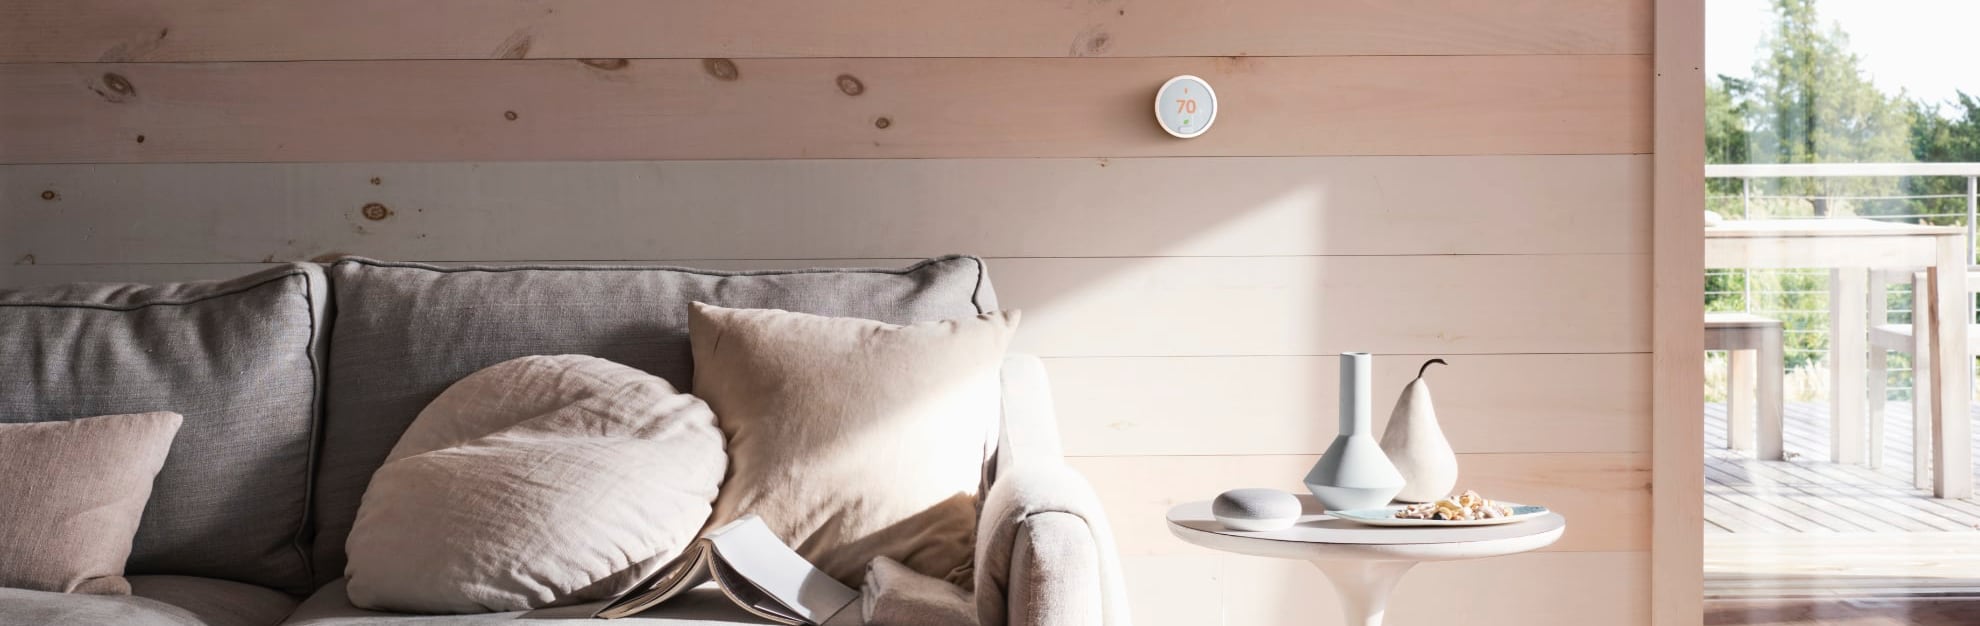 Vivint Home Automation in Orange County